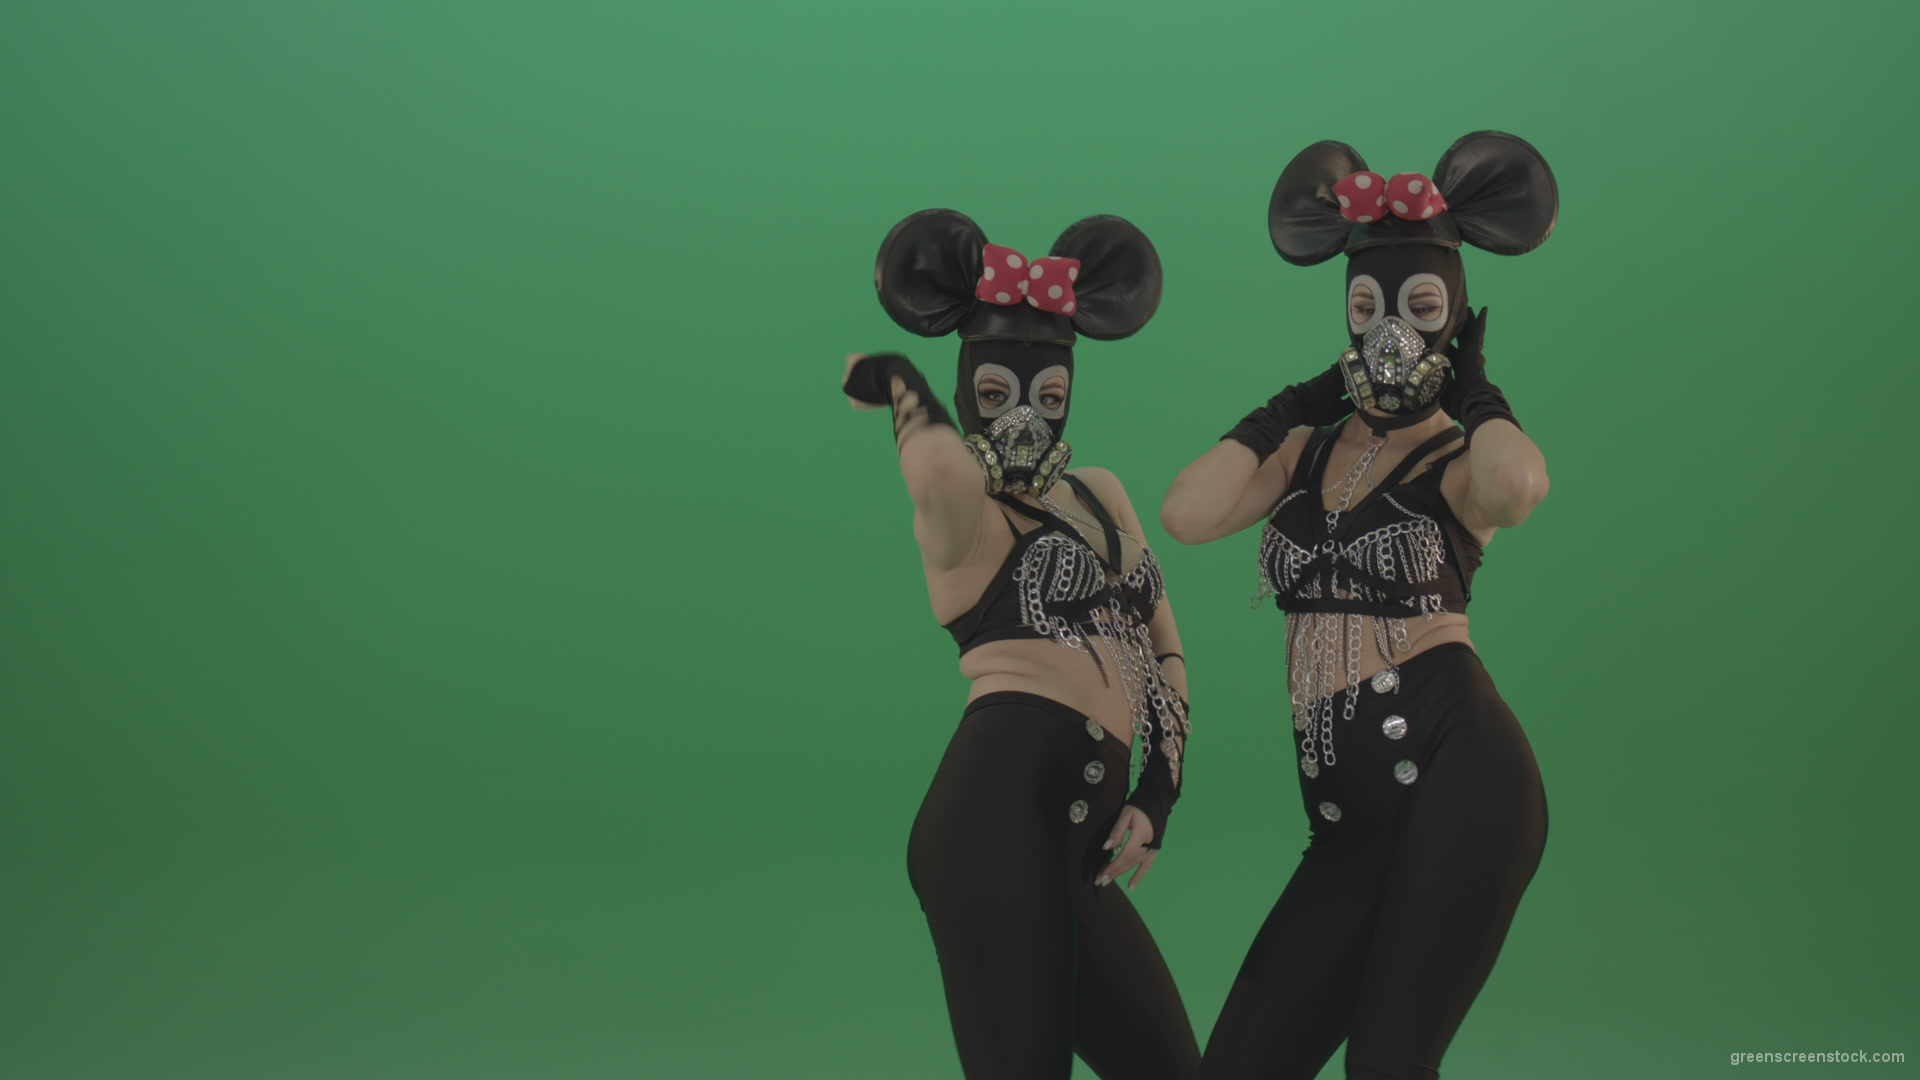 Girls-dressed-Mickey-Mouse-dance-well-on-green-screen_009 Green Screen Stock